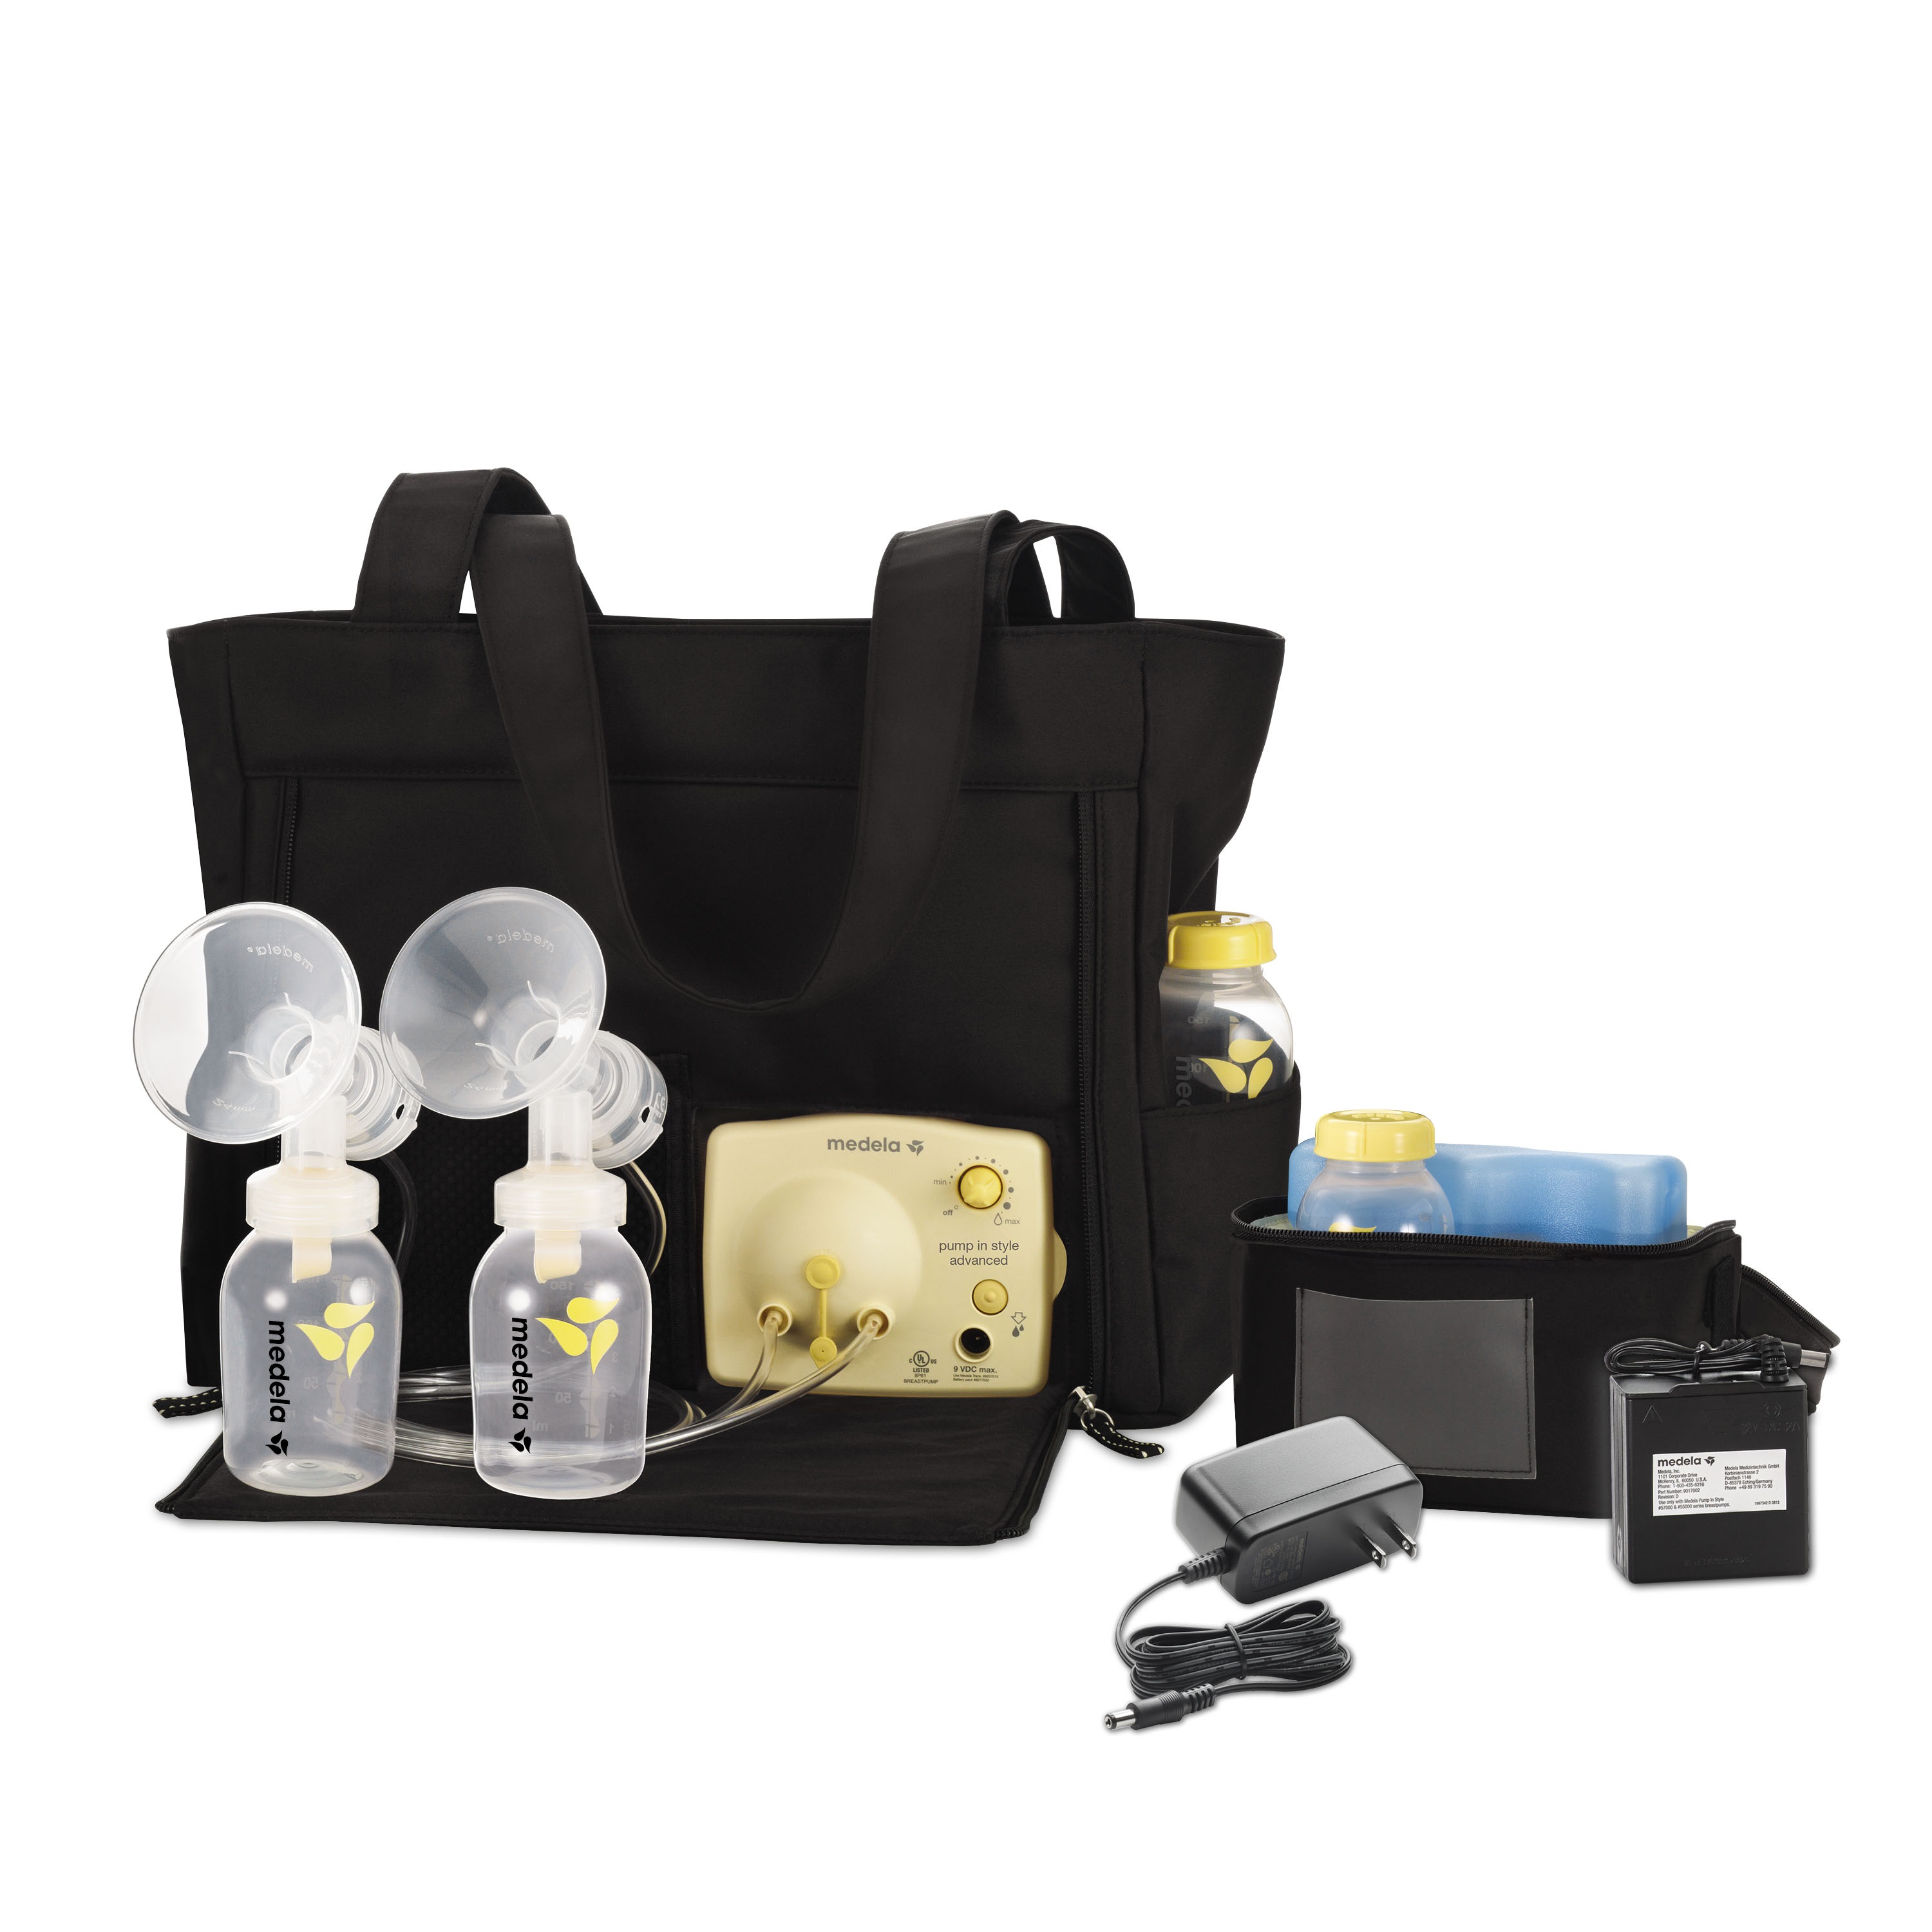 Medela Pump In Style Advanced Breast Pump with On-the-go Tote with International Adapter - image 1 of 9